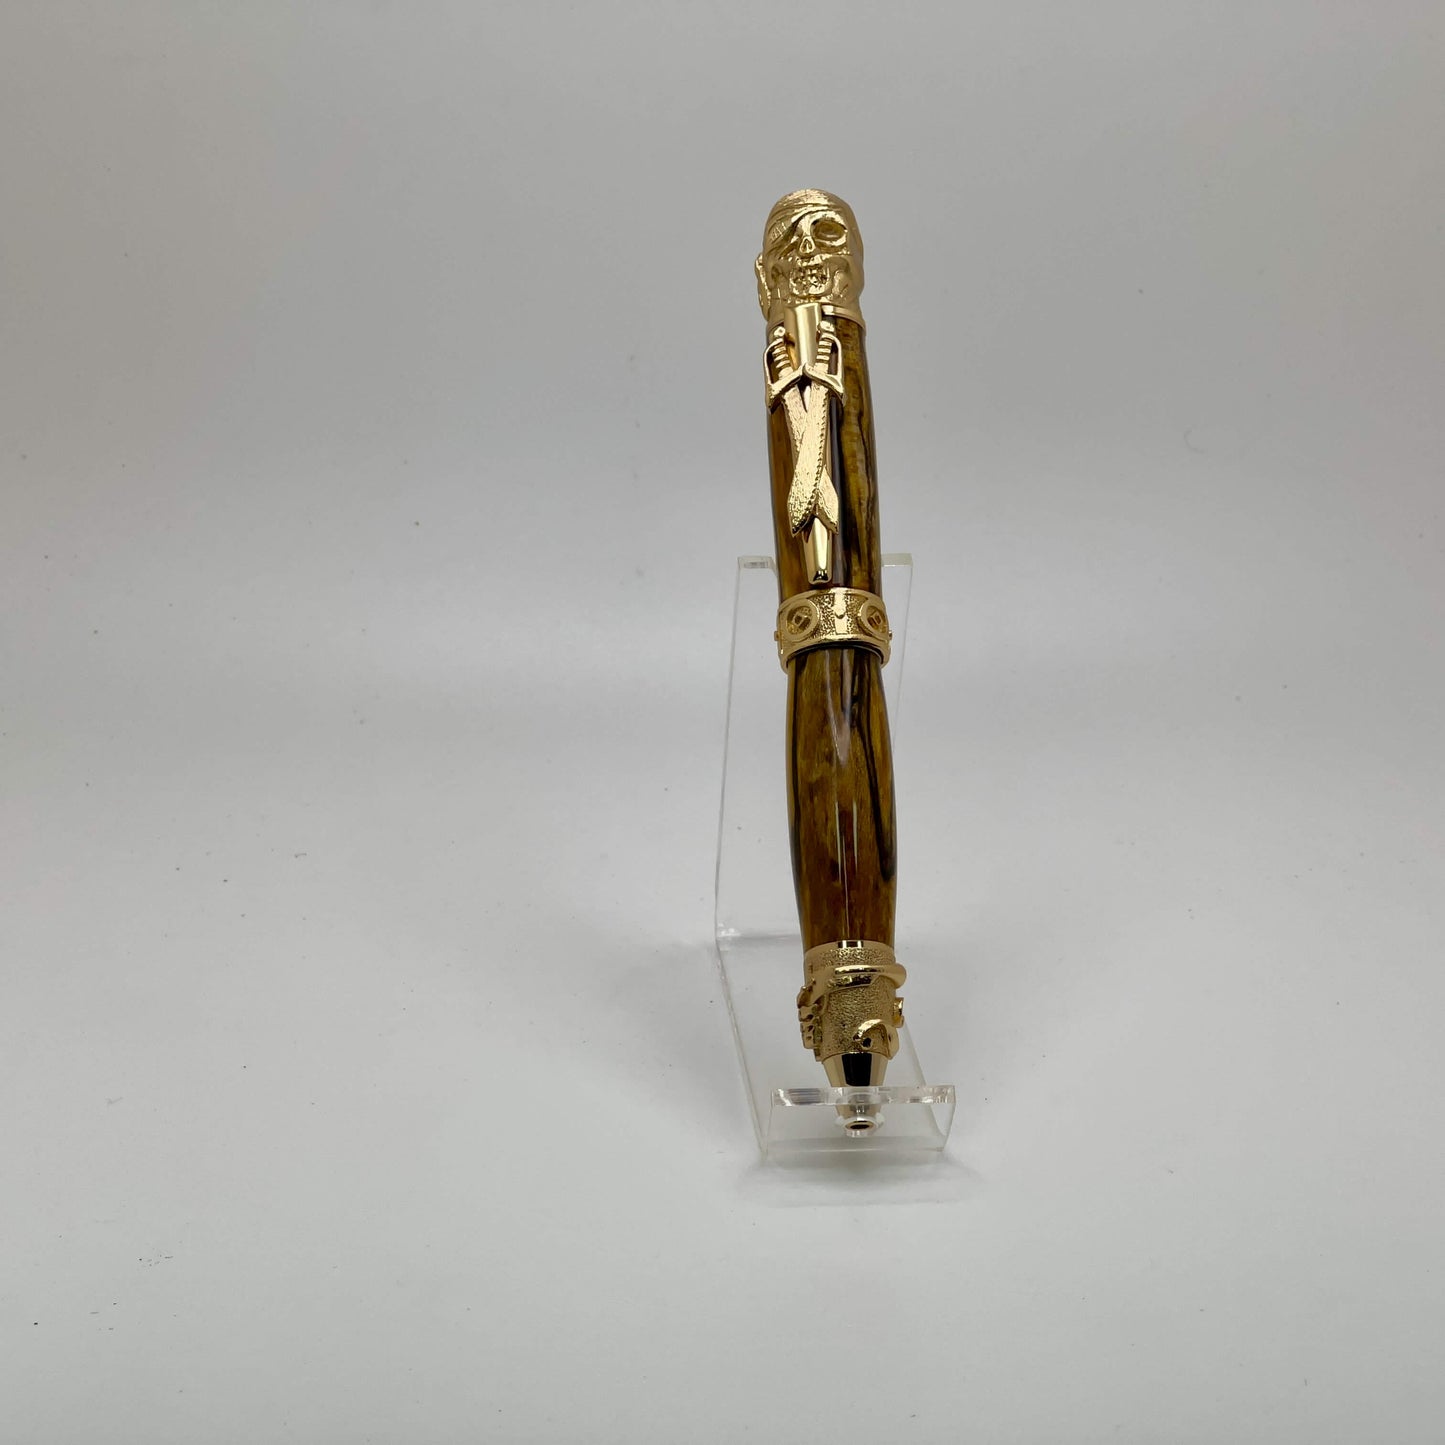 Pamlico Pirate Twist Pen In Gold- A Treasure for Swashbuckling Adventurers